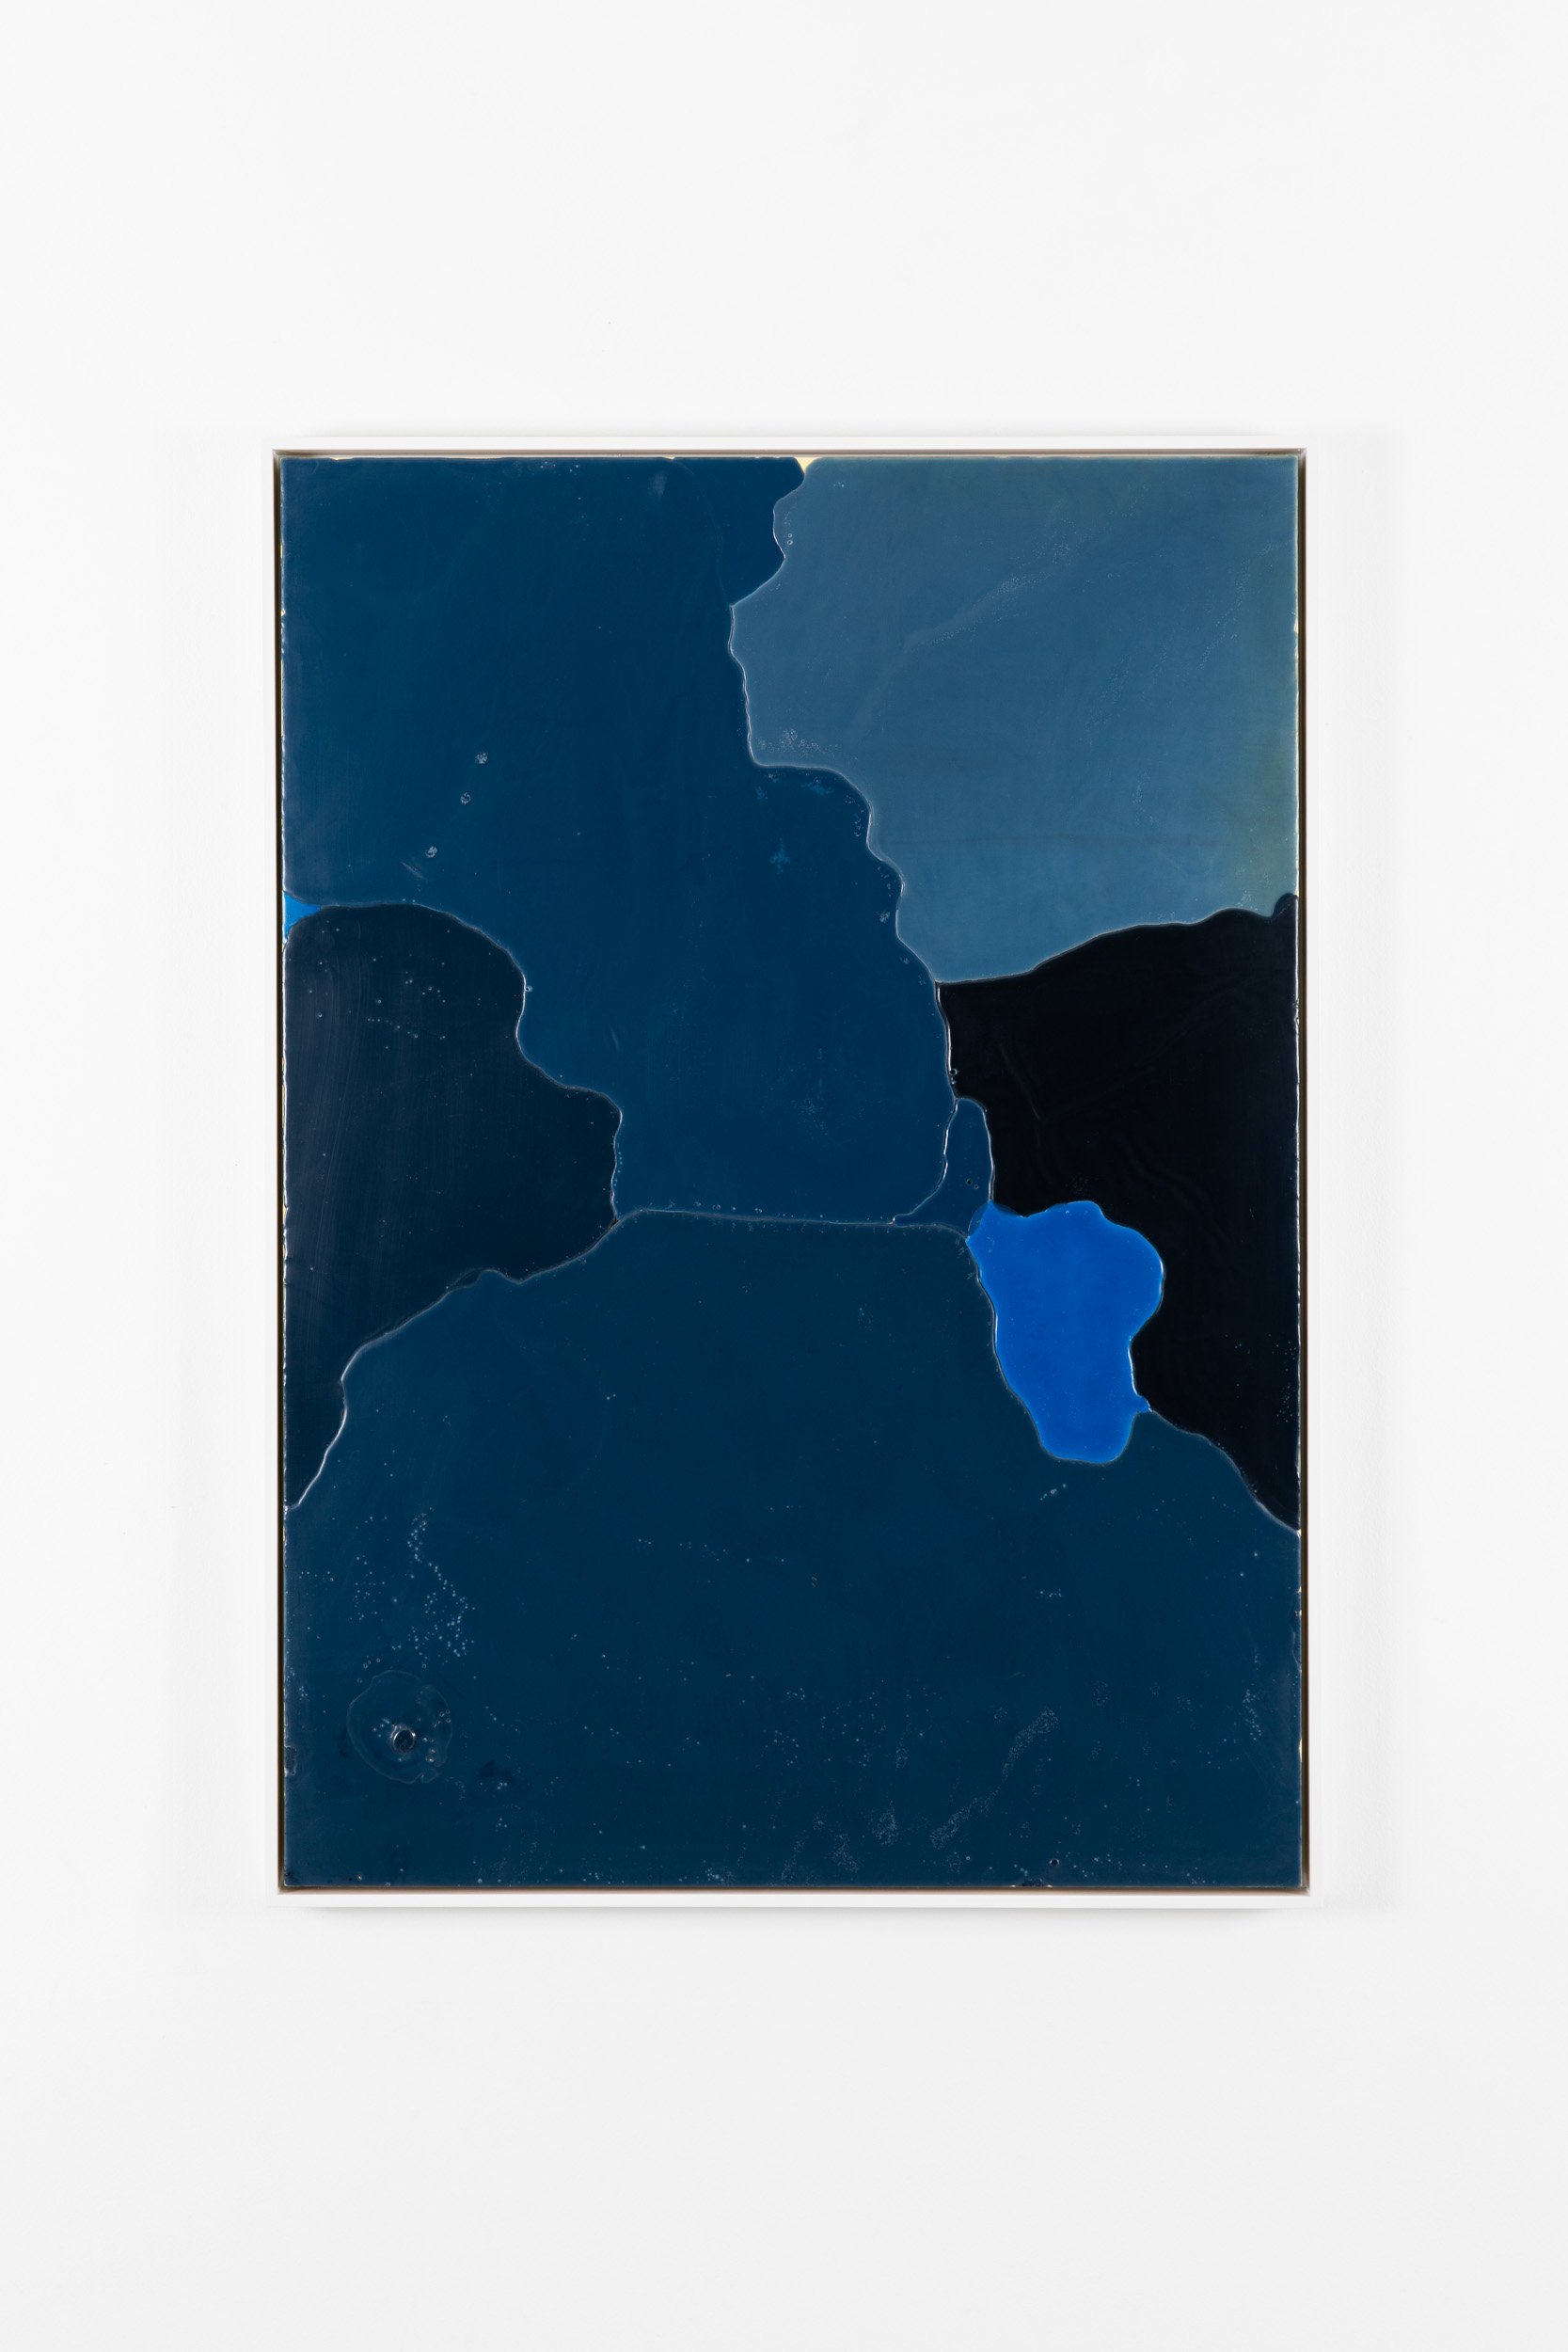  CC - CR # 15 (blue) Beeswax, pigments and gum resin on poplar panel. 104 x 74 cm  